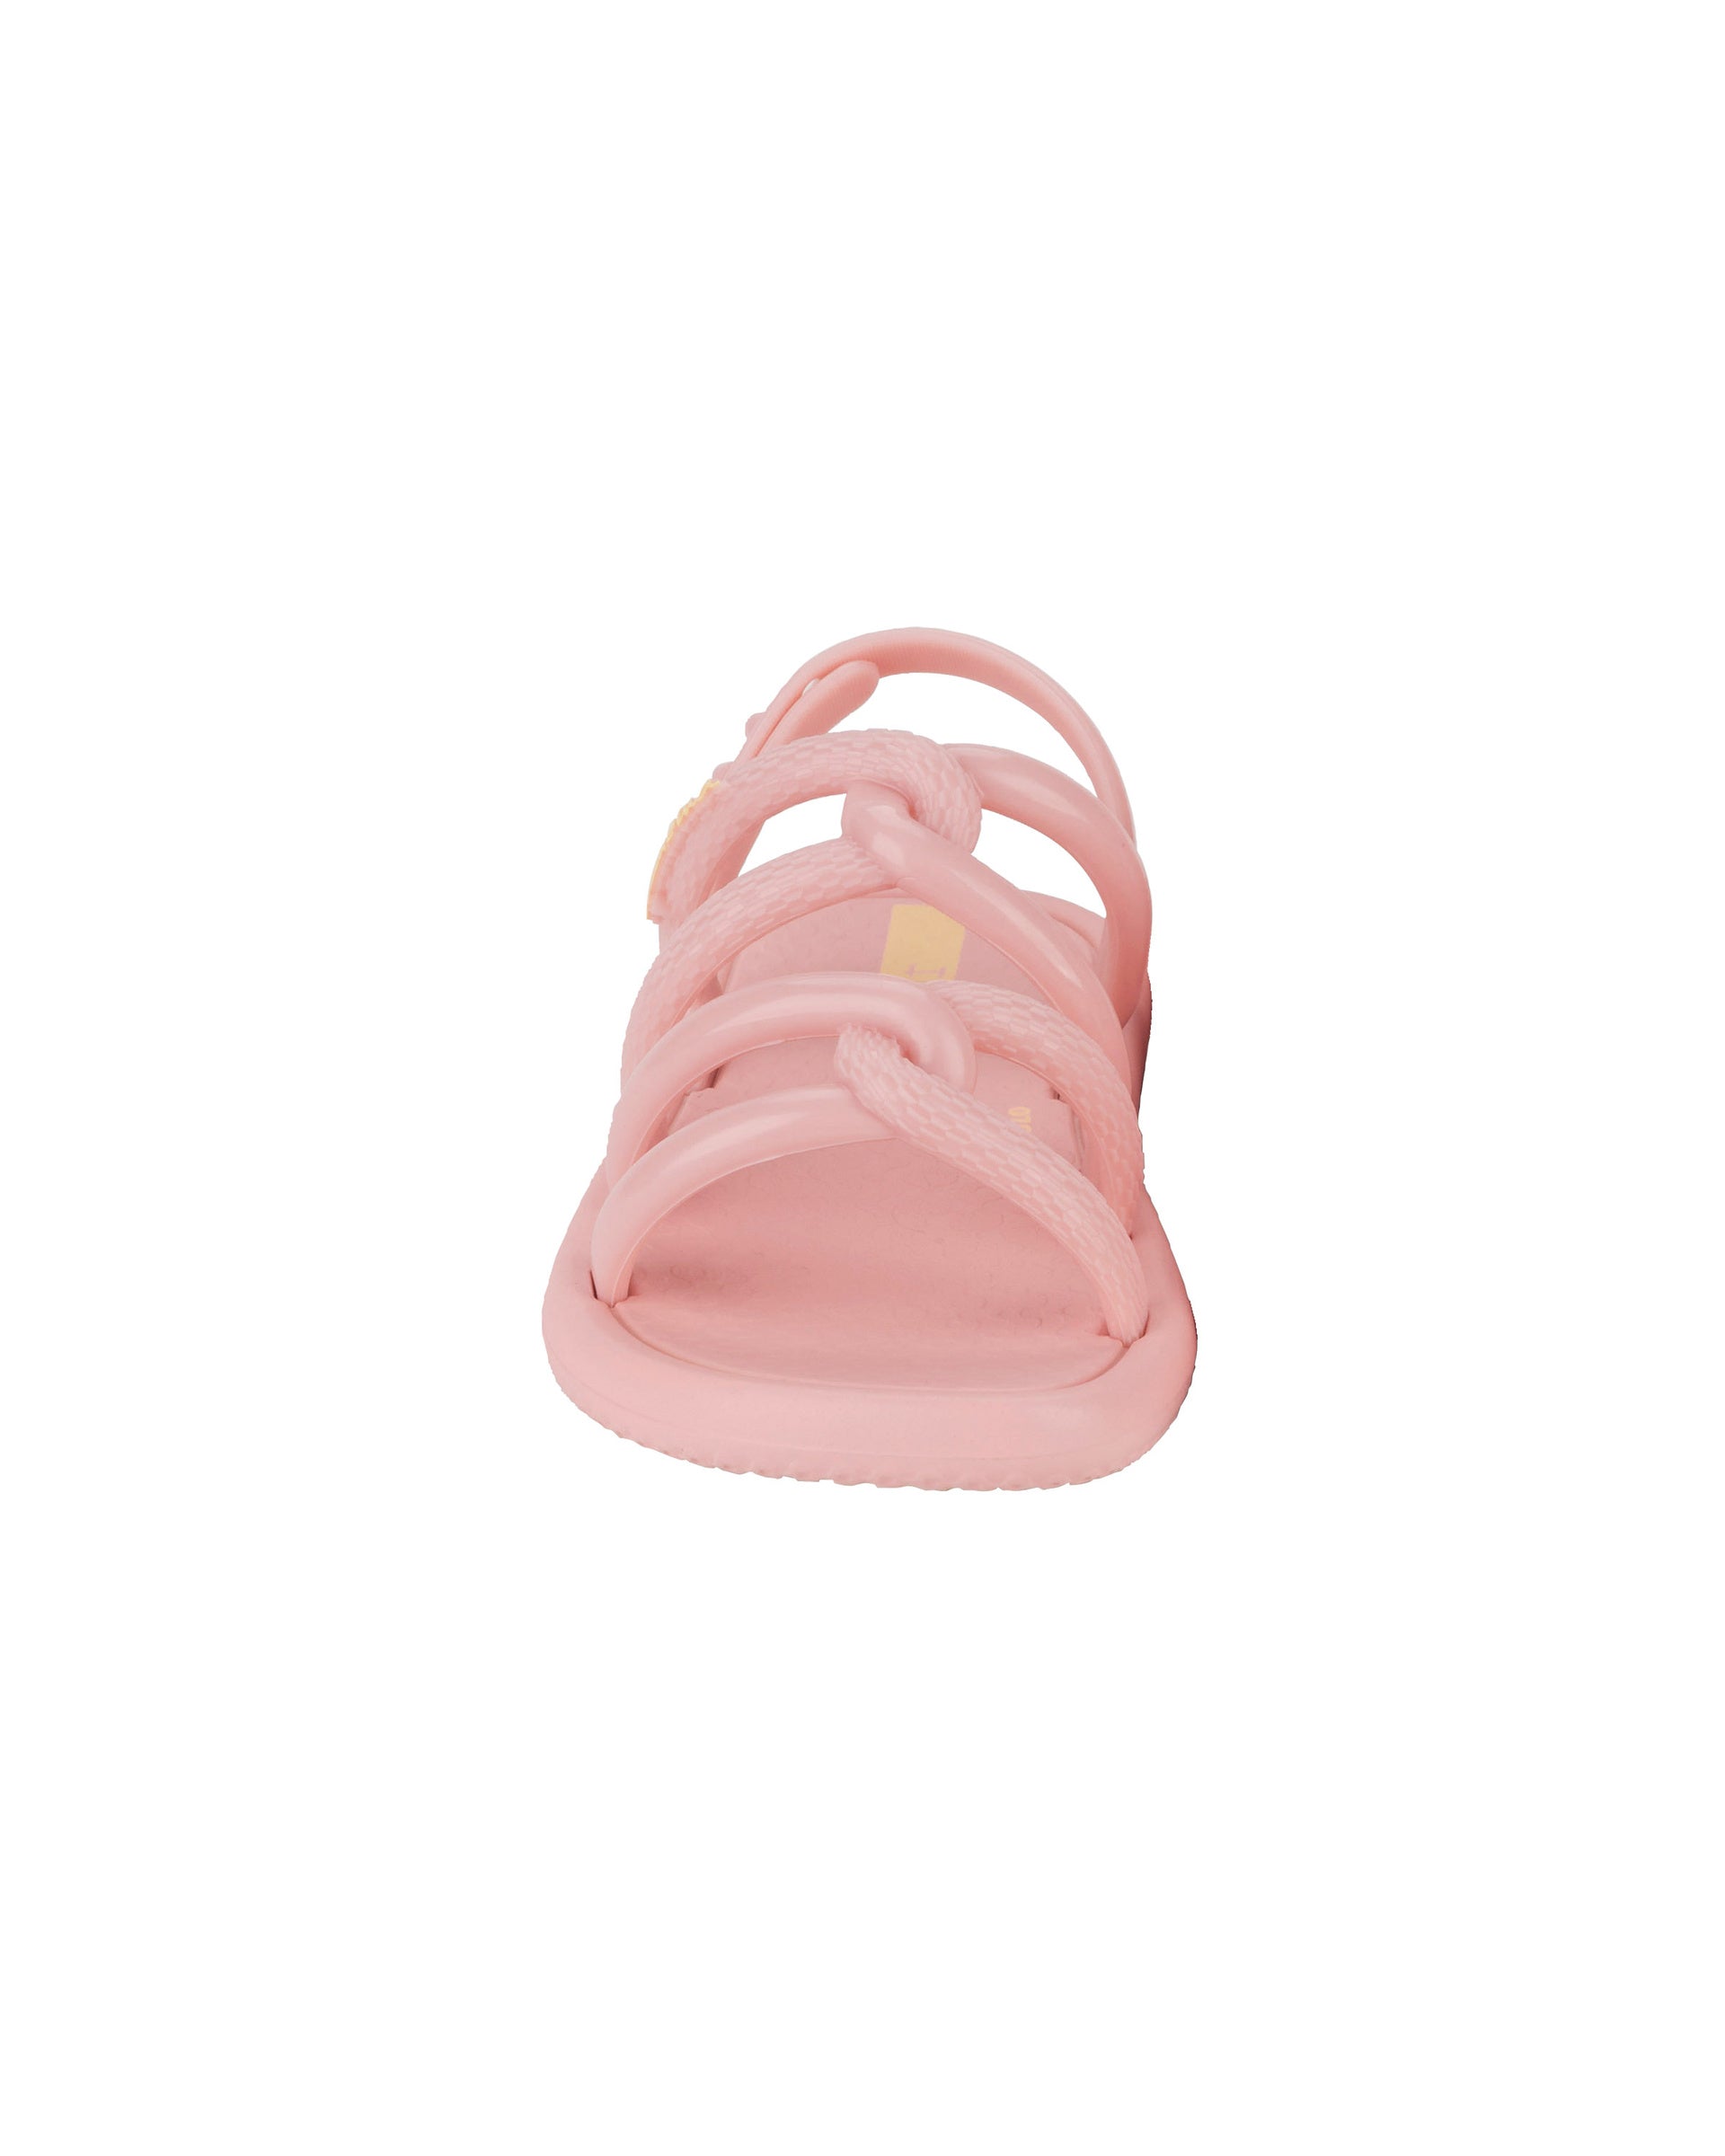 Front view of a light pink baby Ipanema Meu Sol Sandal. 